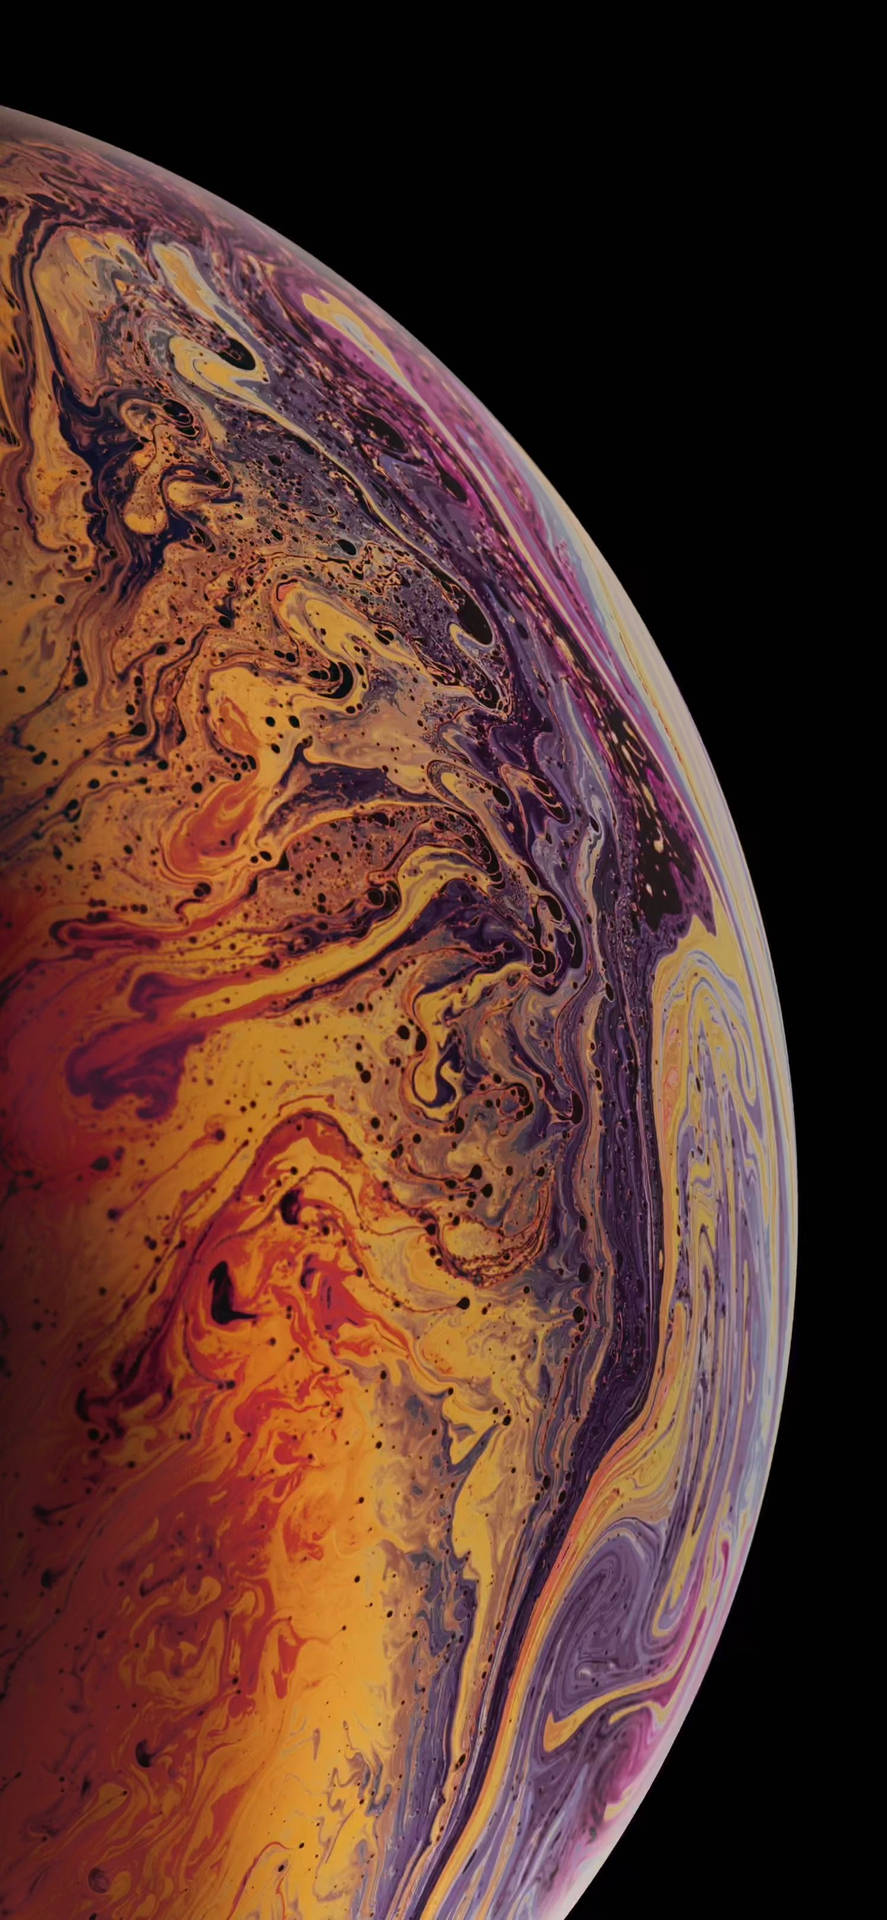 "Explore the Universe with the Iphone Xs Planet" Wallpaper